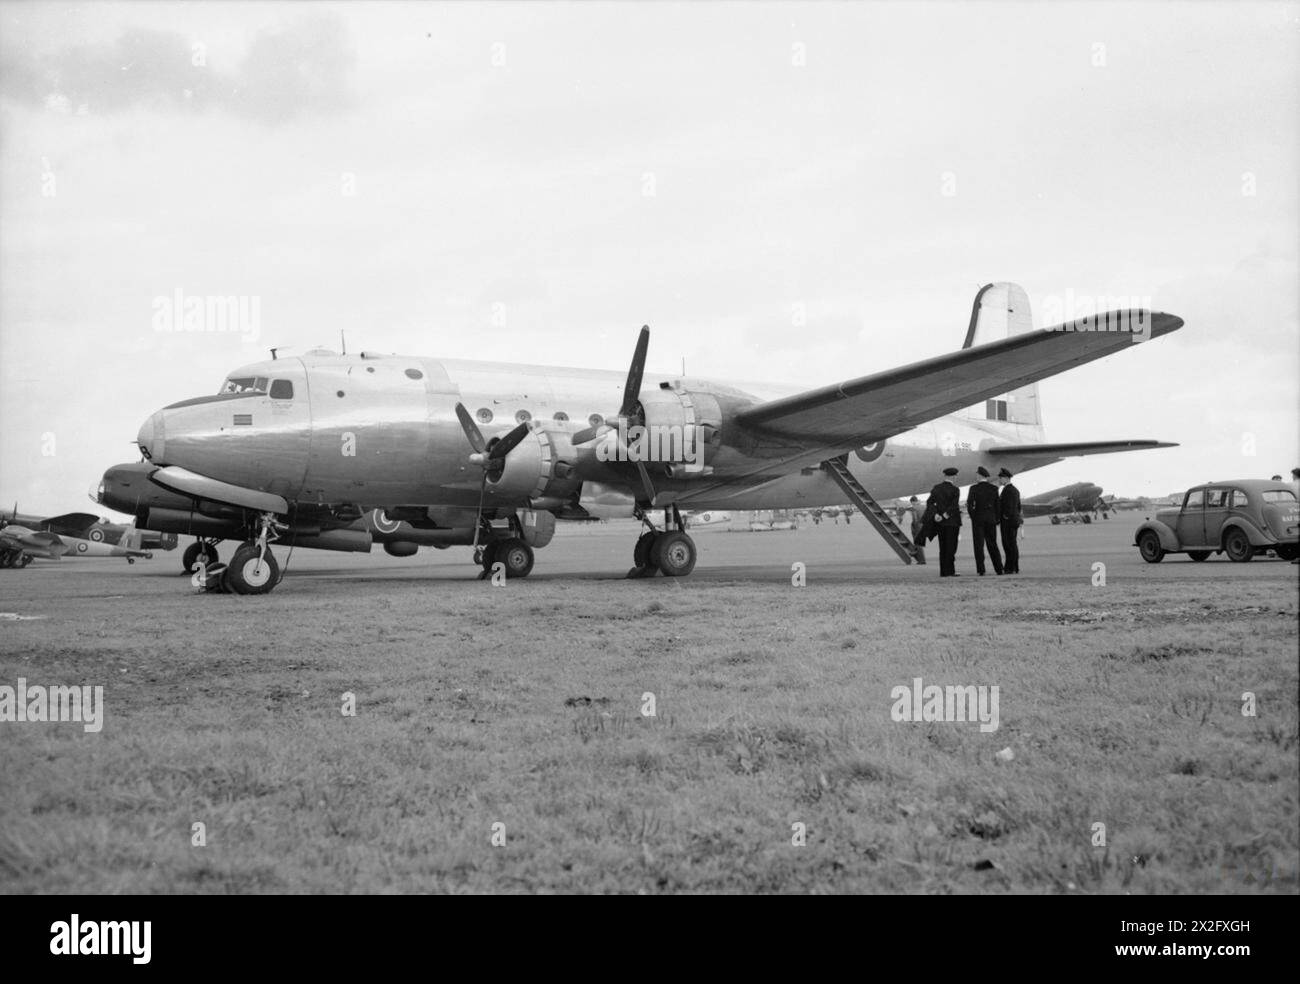 AMERICAN AIRCRAFT IN ROYAL AIR FORCE SERVICE 1939-1945: DOUGLAS SKYMASTER. - Skymaster Mark I, KL990, the aircraft of the Commanding Officer of No. 232 Squadron RAF, at Prestwick airport, Ayrshire, prior to departing on a trans-Atlantic flight Royal Air Force, Maintenance Unit, 233 Stock Photo